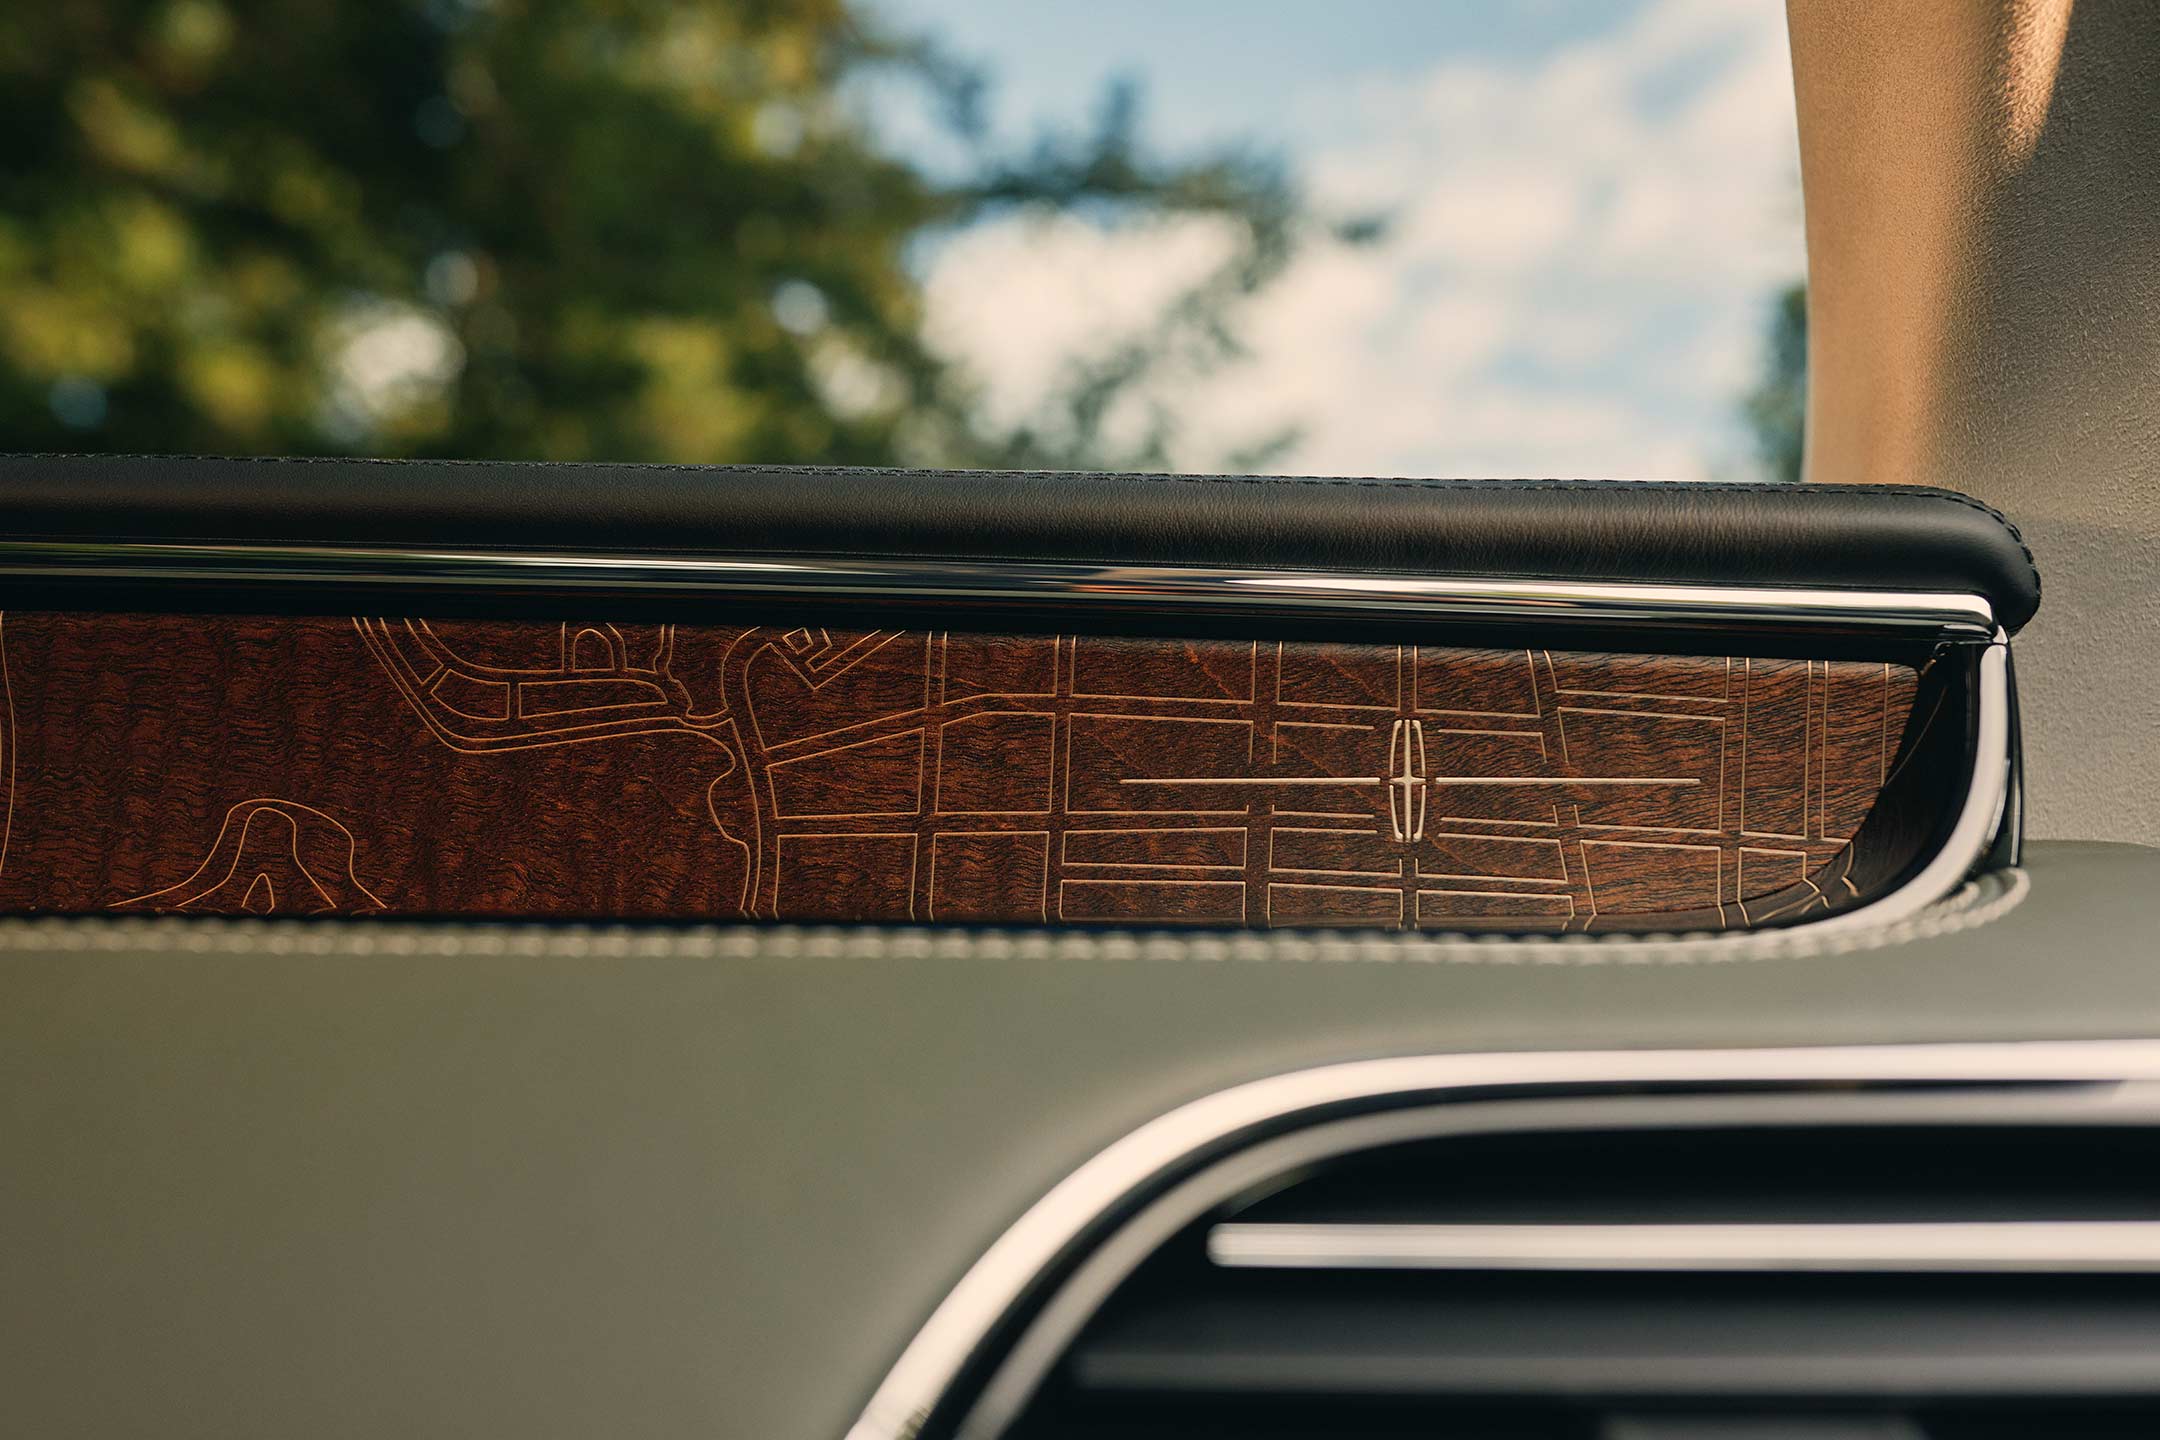 Laser-etched wood inlays on the dashboard show off Central Park pathways and a Lincoln logo.